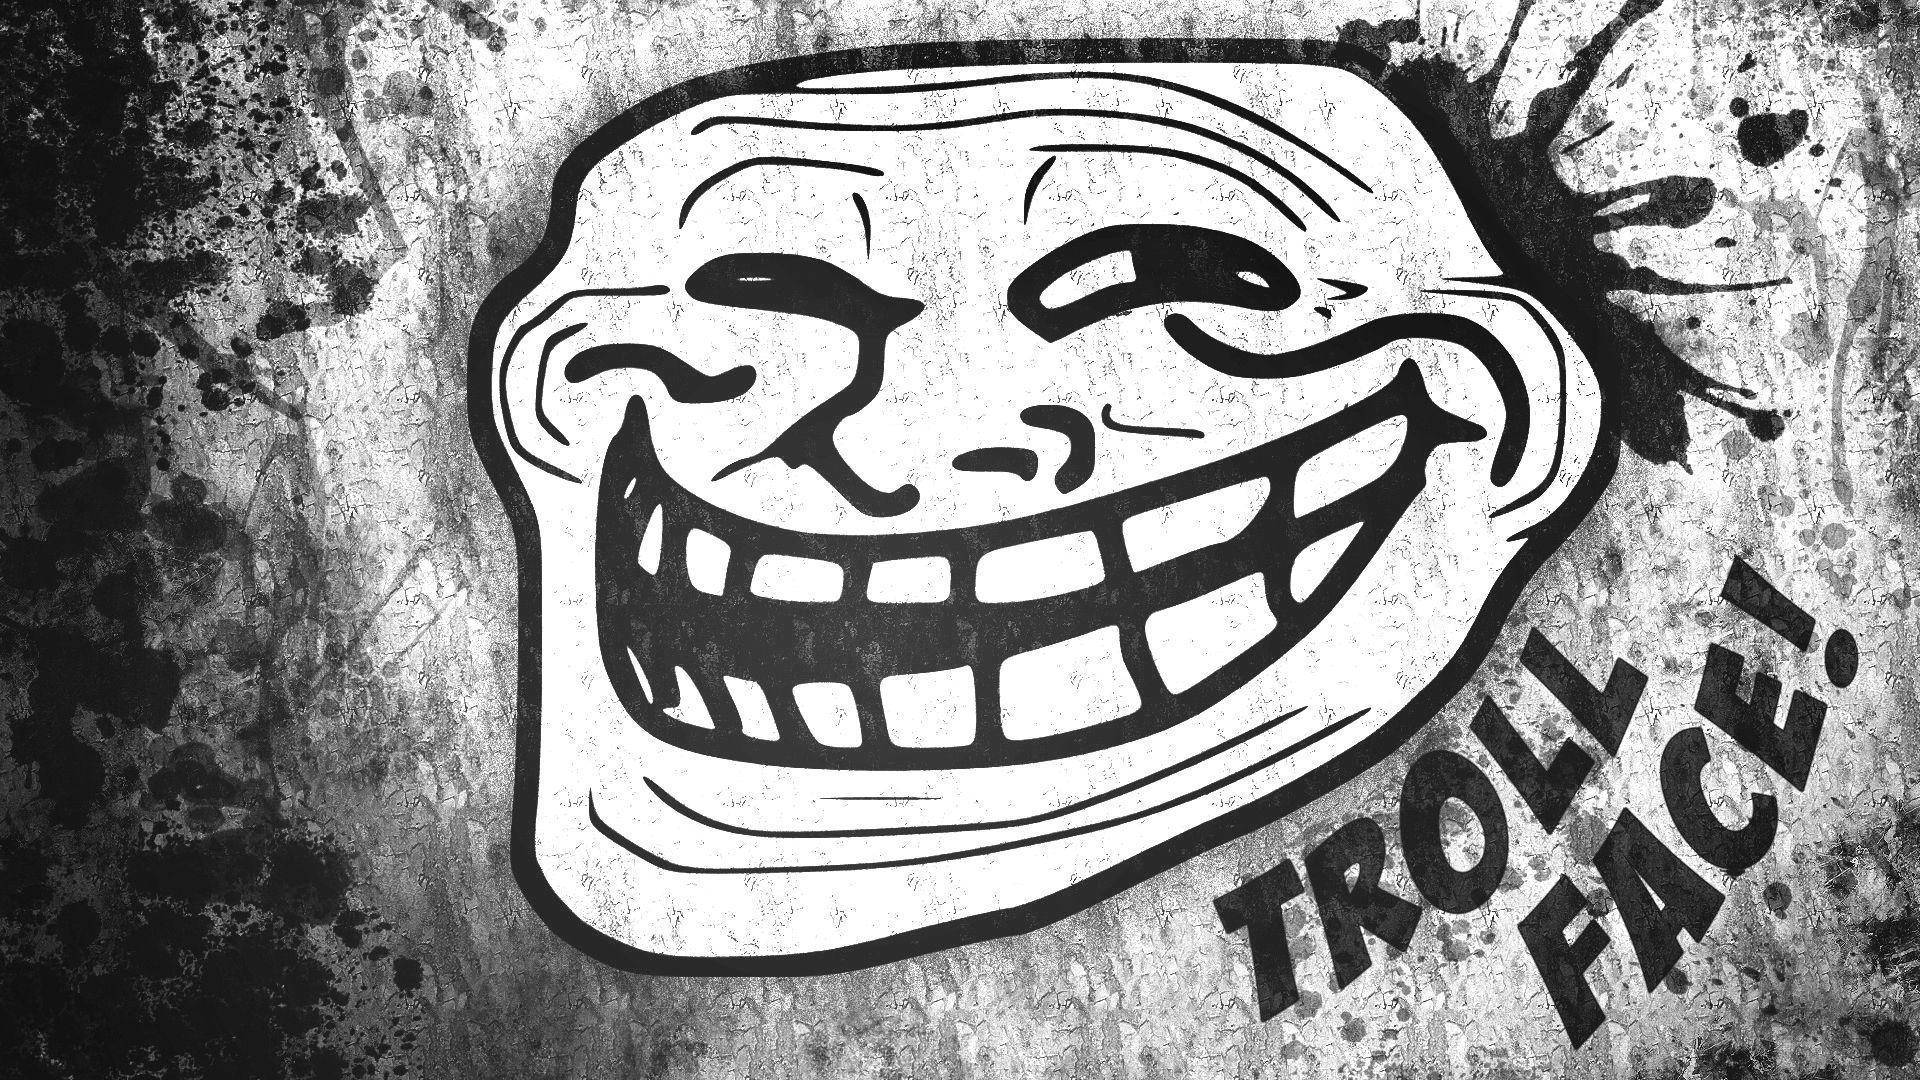 Download A Group Of Troll Faces With Different Faces Wallpaper | Wallpapers .com